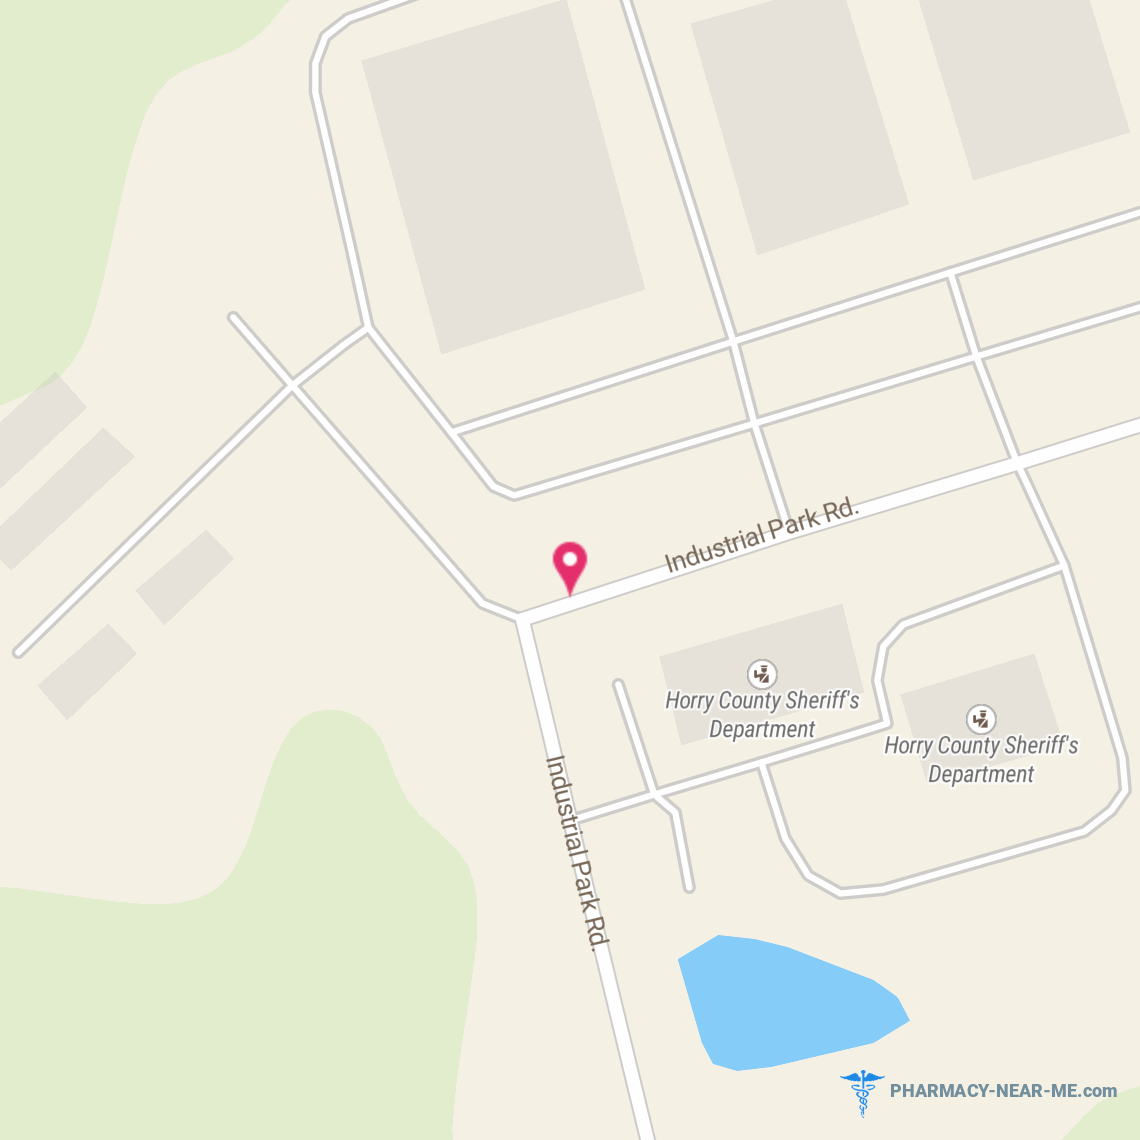 DHEC REGION 6 HEALTH DISTRICT PHARMACY - Pharmacy Hours, Phone, Reviews & Information: 1931 Industrial Park Road, Conway, South Carolina 29526, United States